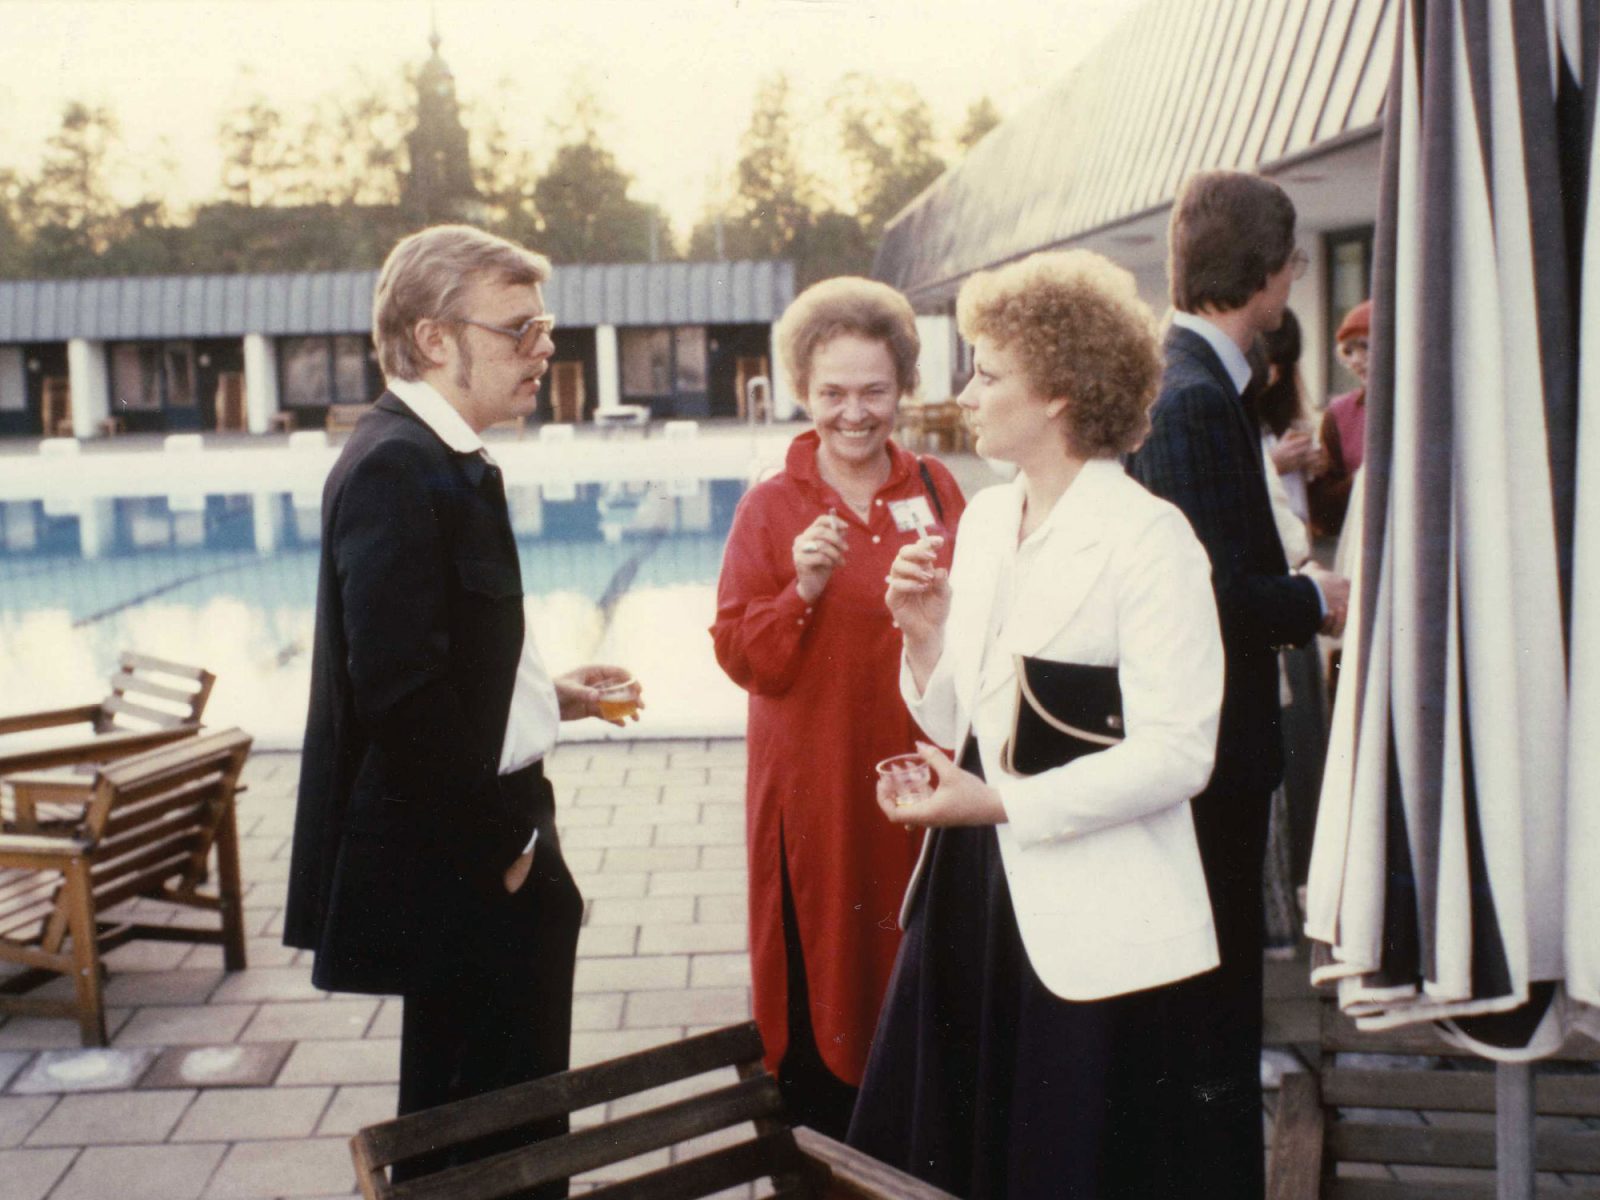 Three people mingle by the pool in 1970s clothes, Jörgen Svensson, IB Bayley and Christina Folkinger.